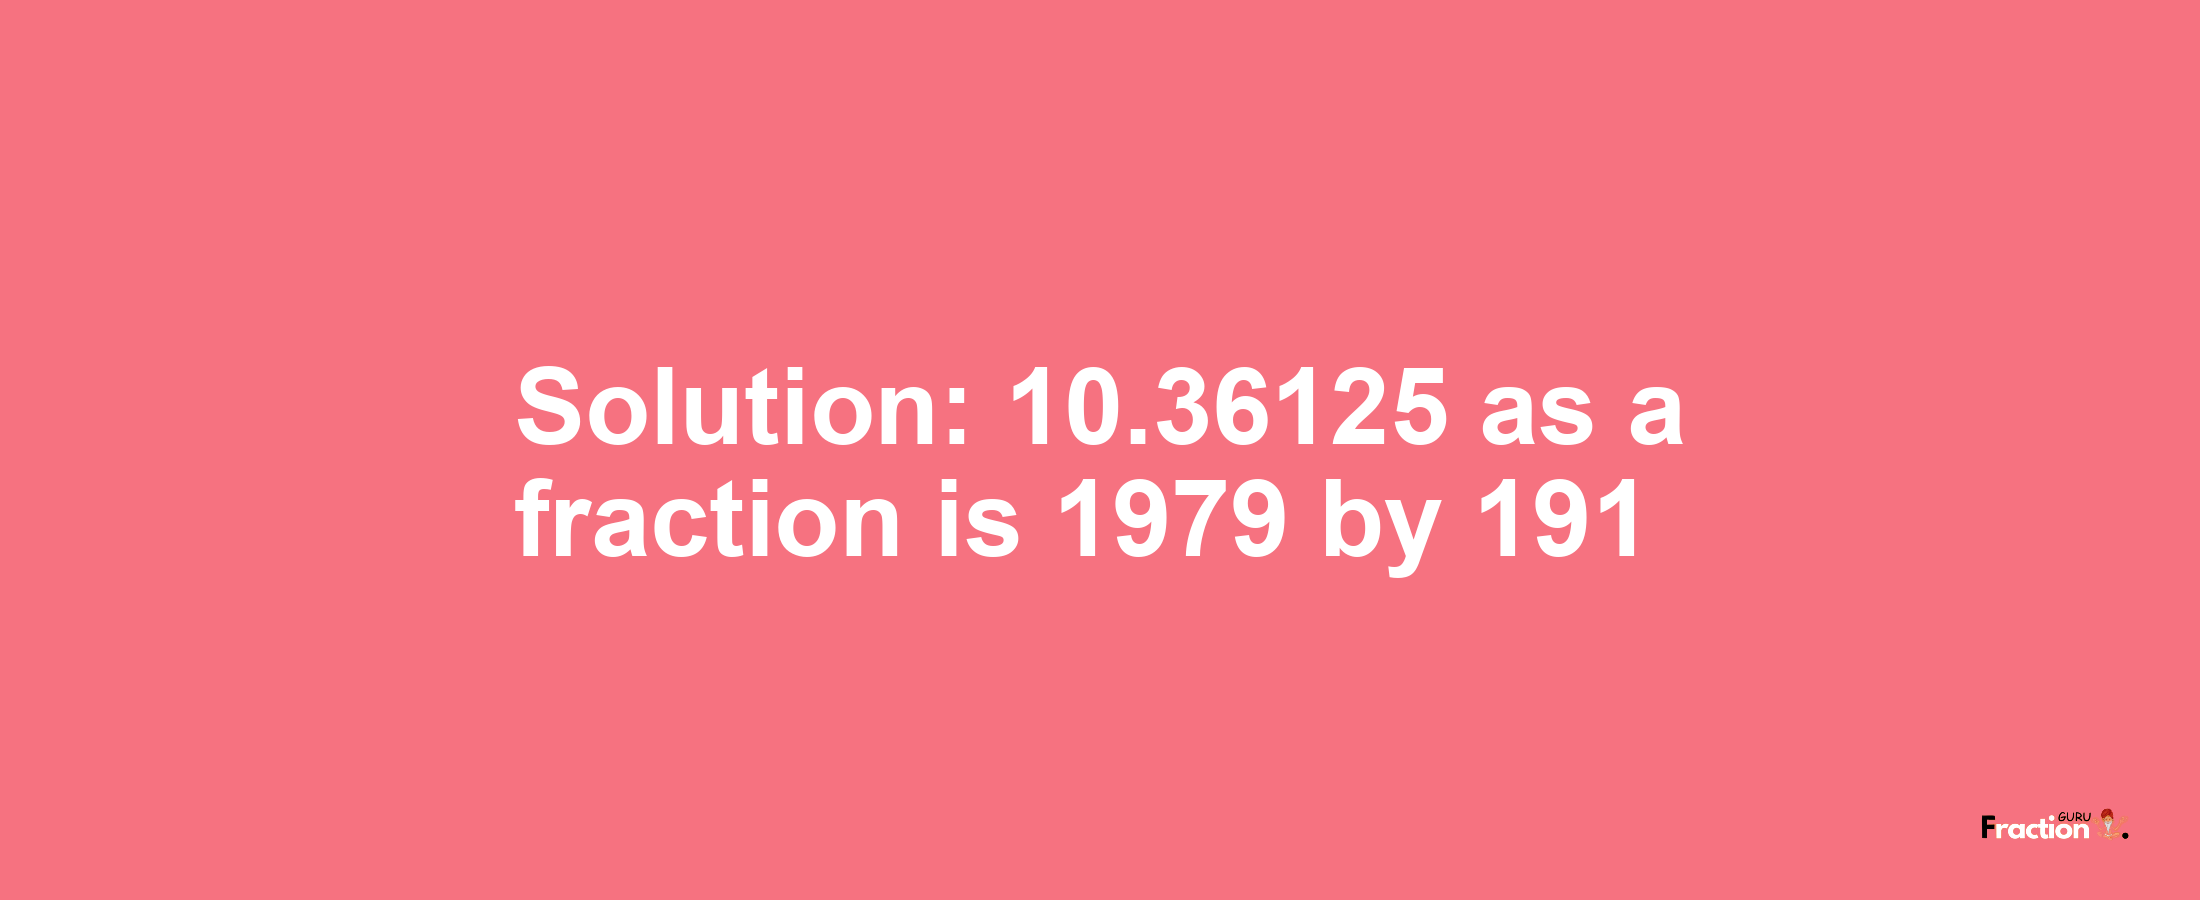 Solution:10.36125 as a fraction is 1979/191